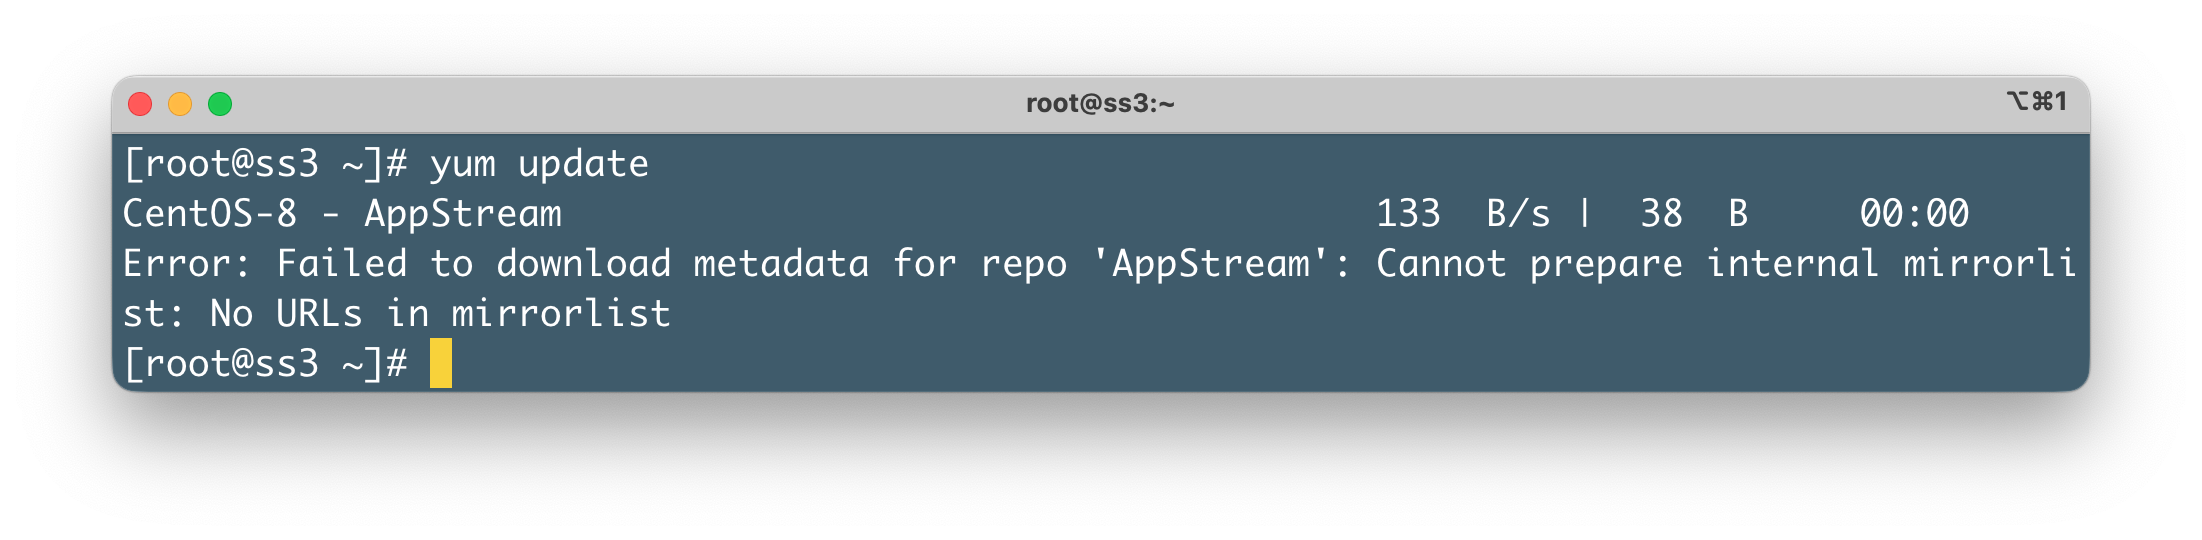 Failed to download metadata for repo 'AppStream'